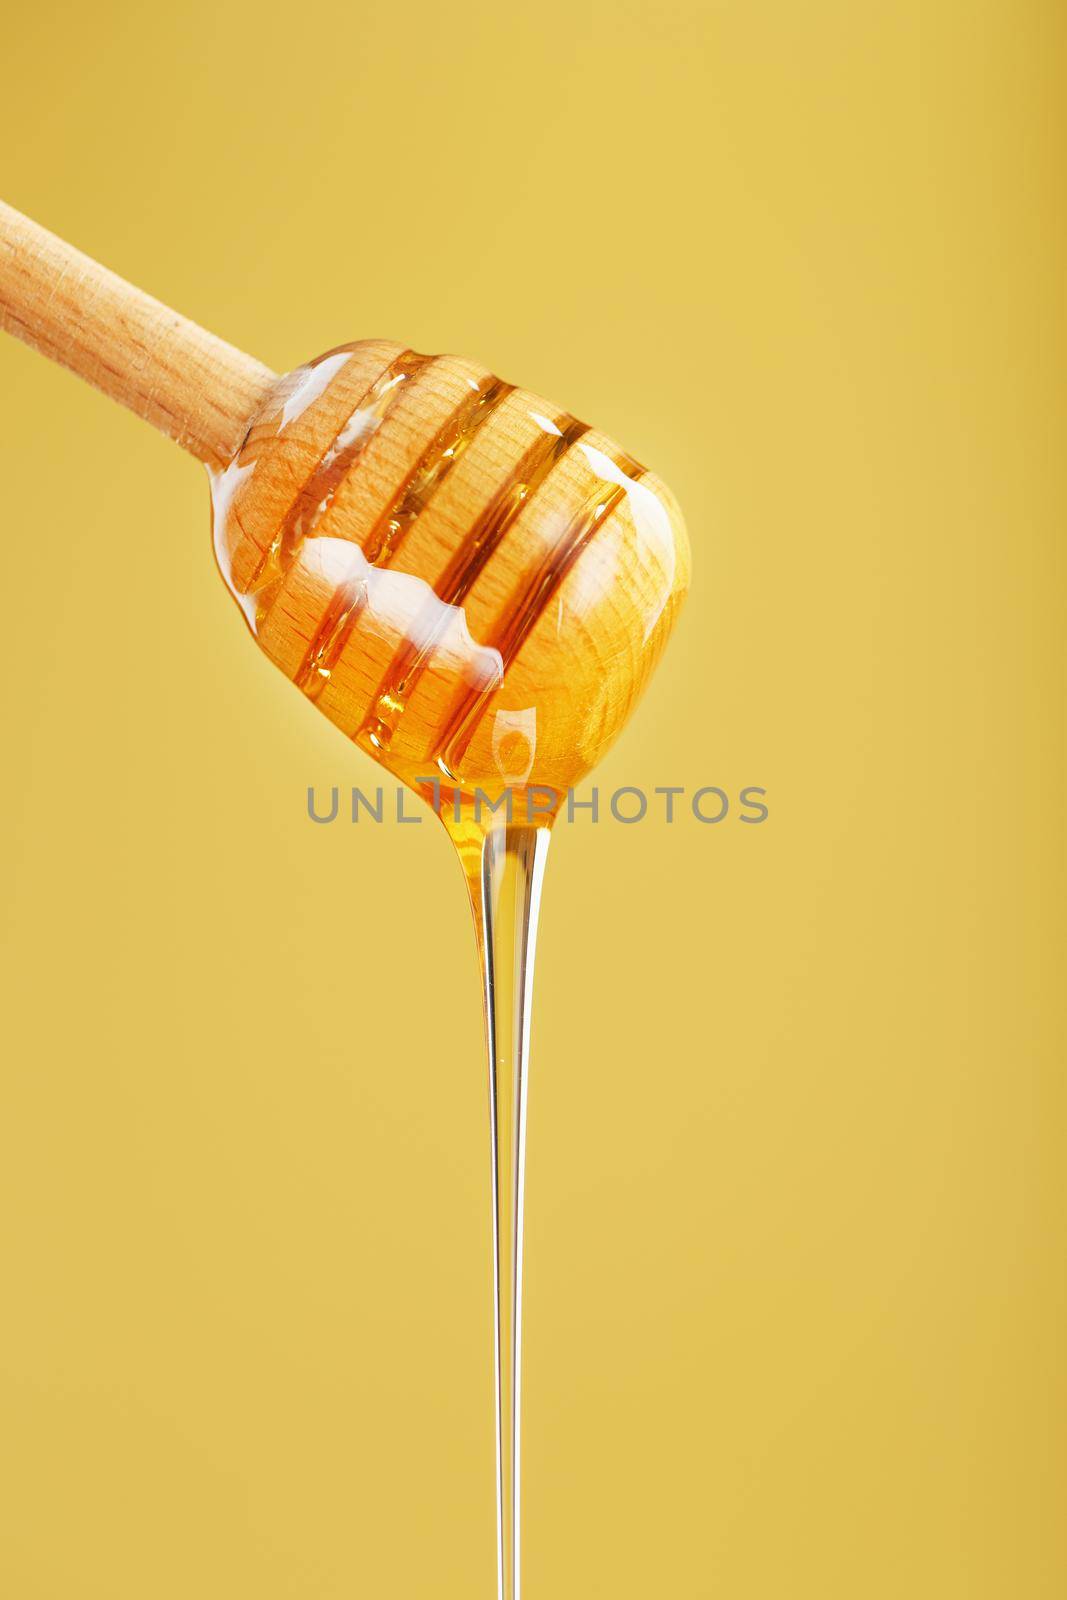 Honey flows down from a honey bucket on a yellow background. The concept of healthy and eco-friendly nutrition